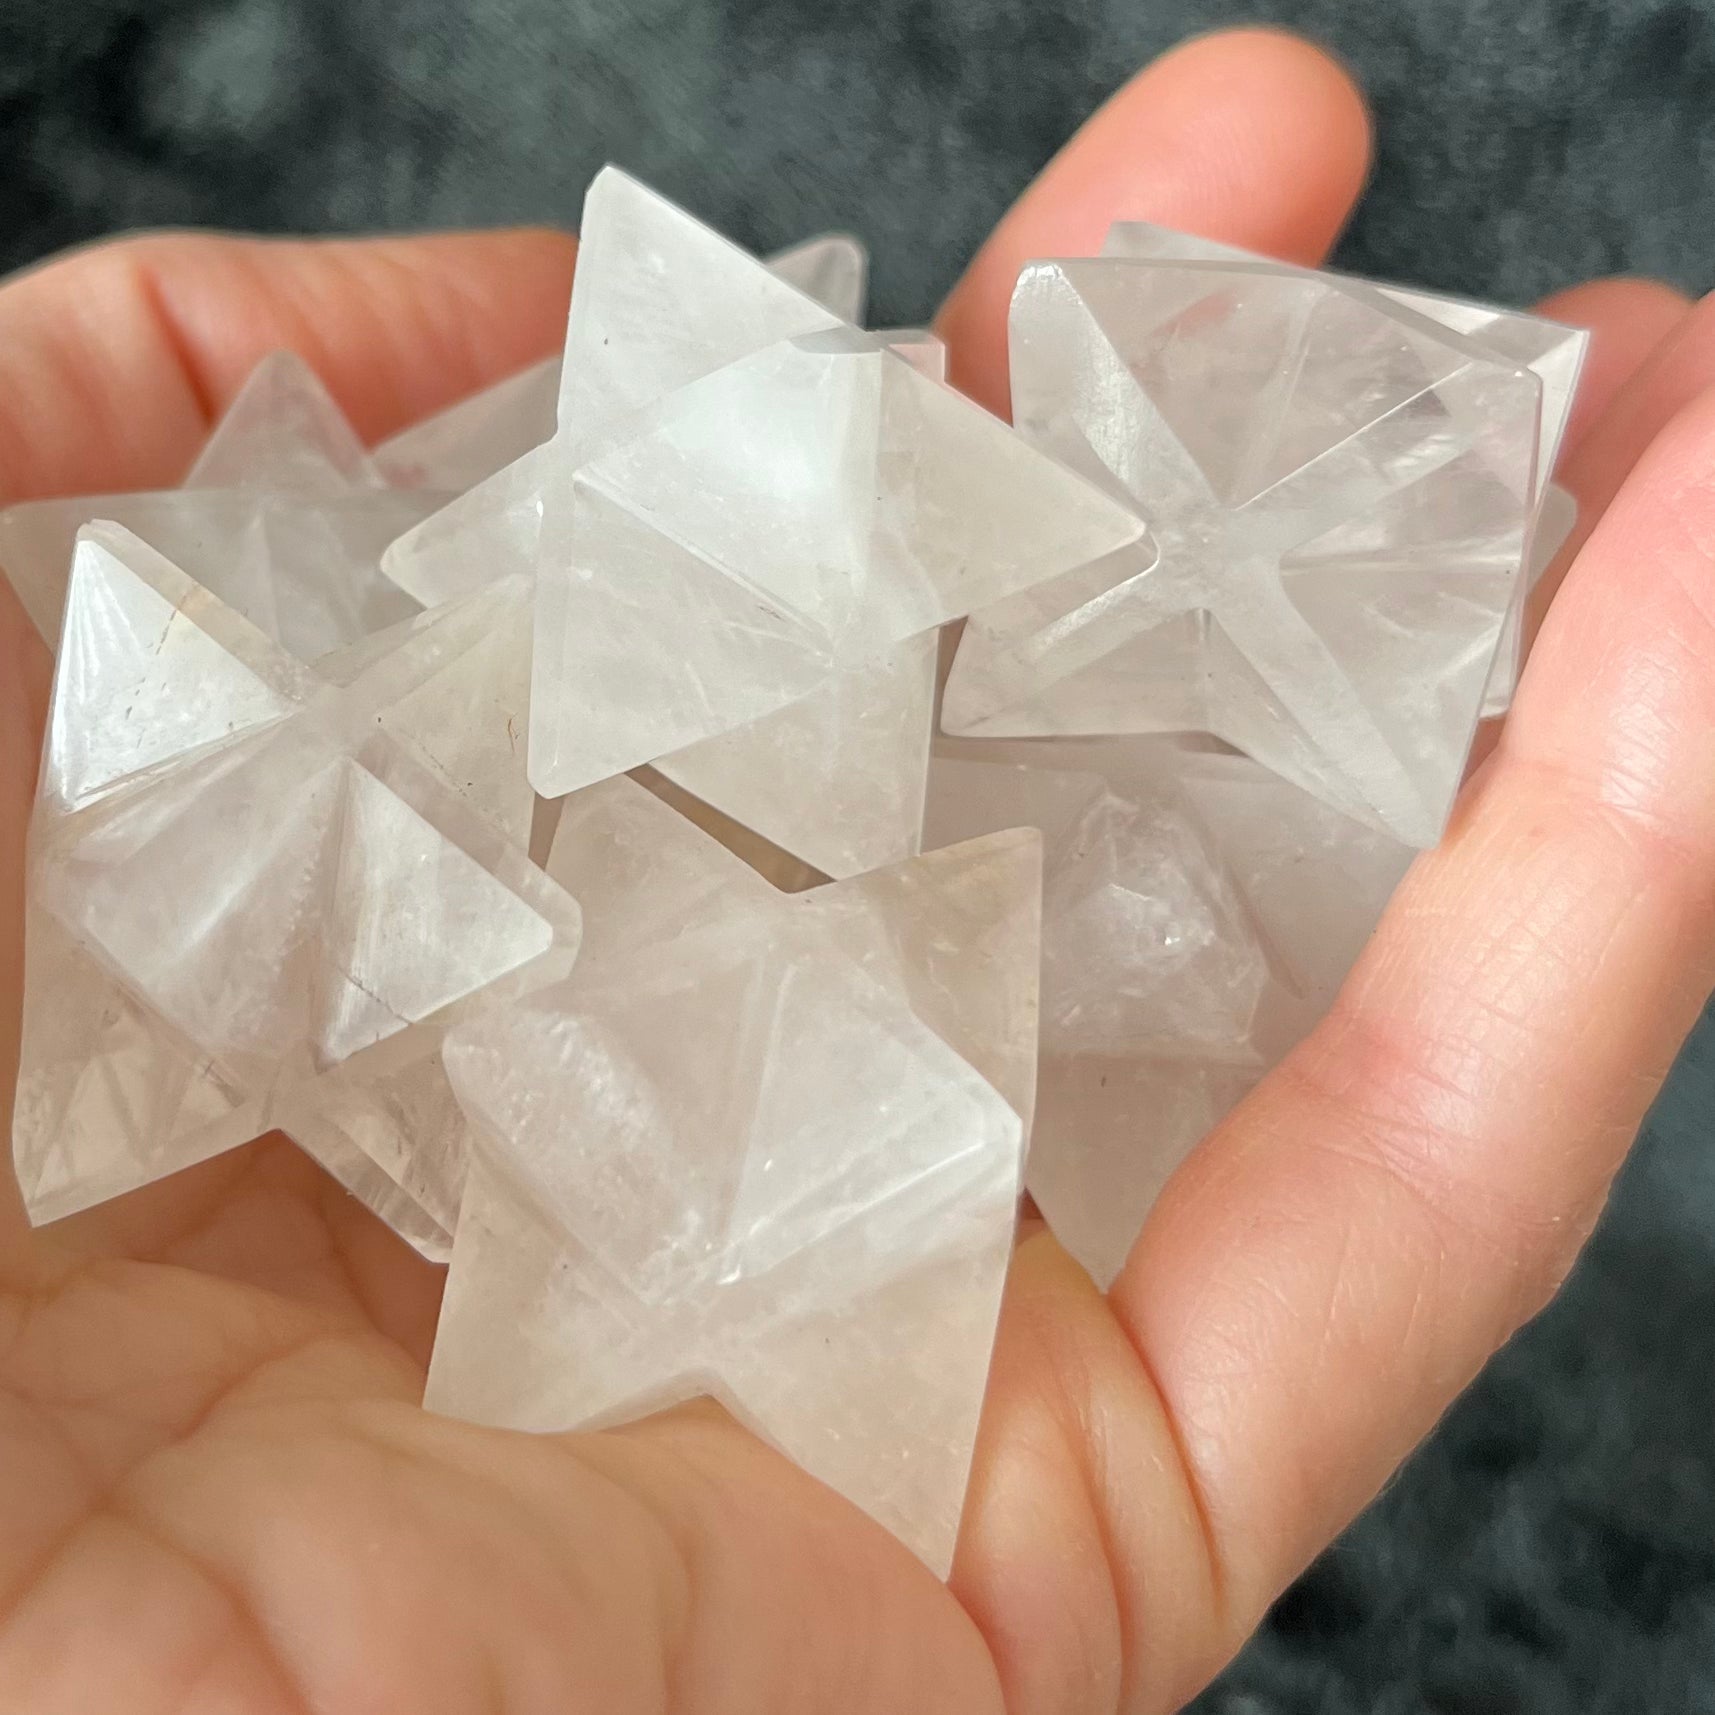 Large quartz merkaba stones, radiant with crystalline energy, ideal for meditation and spiritual practices held gently in the palm of a hand.